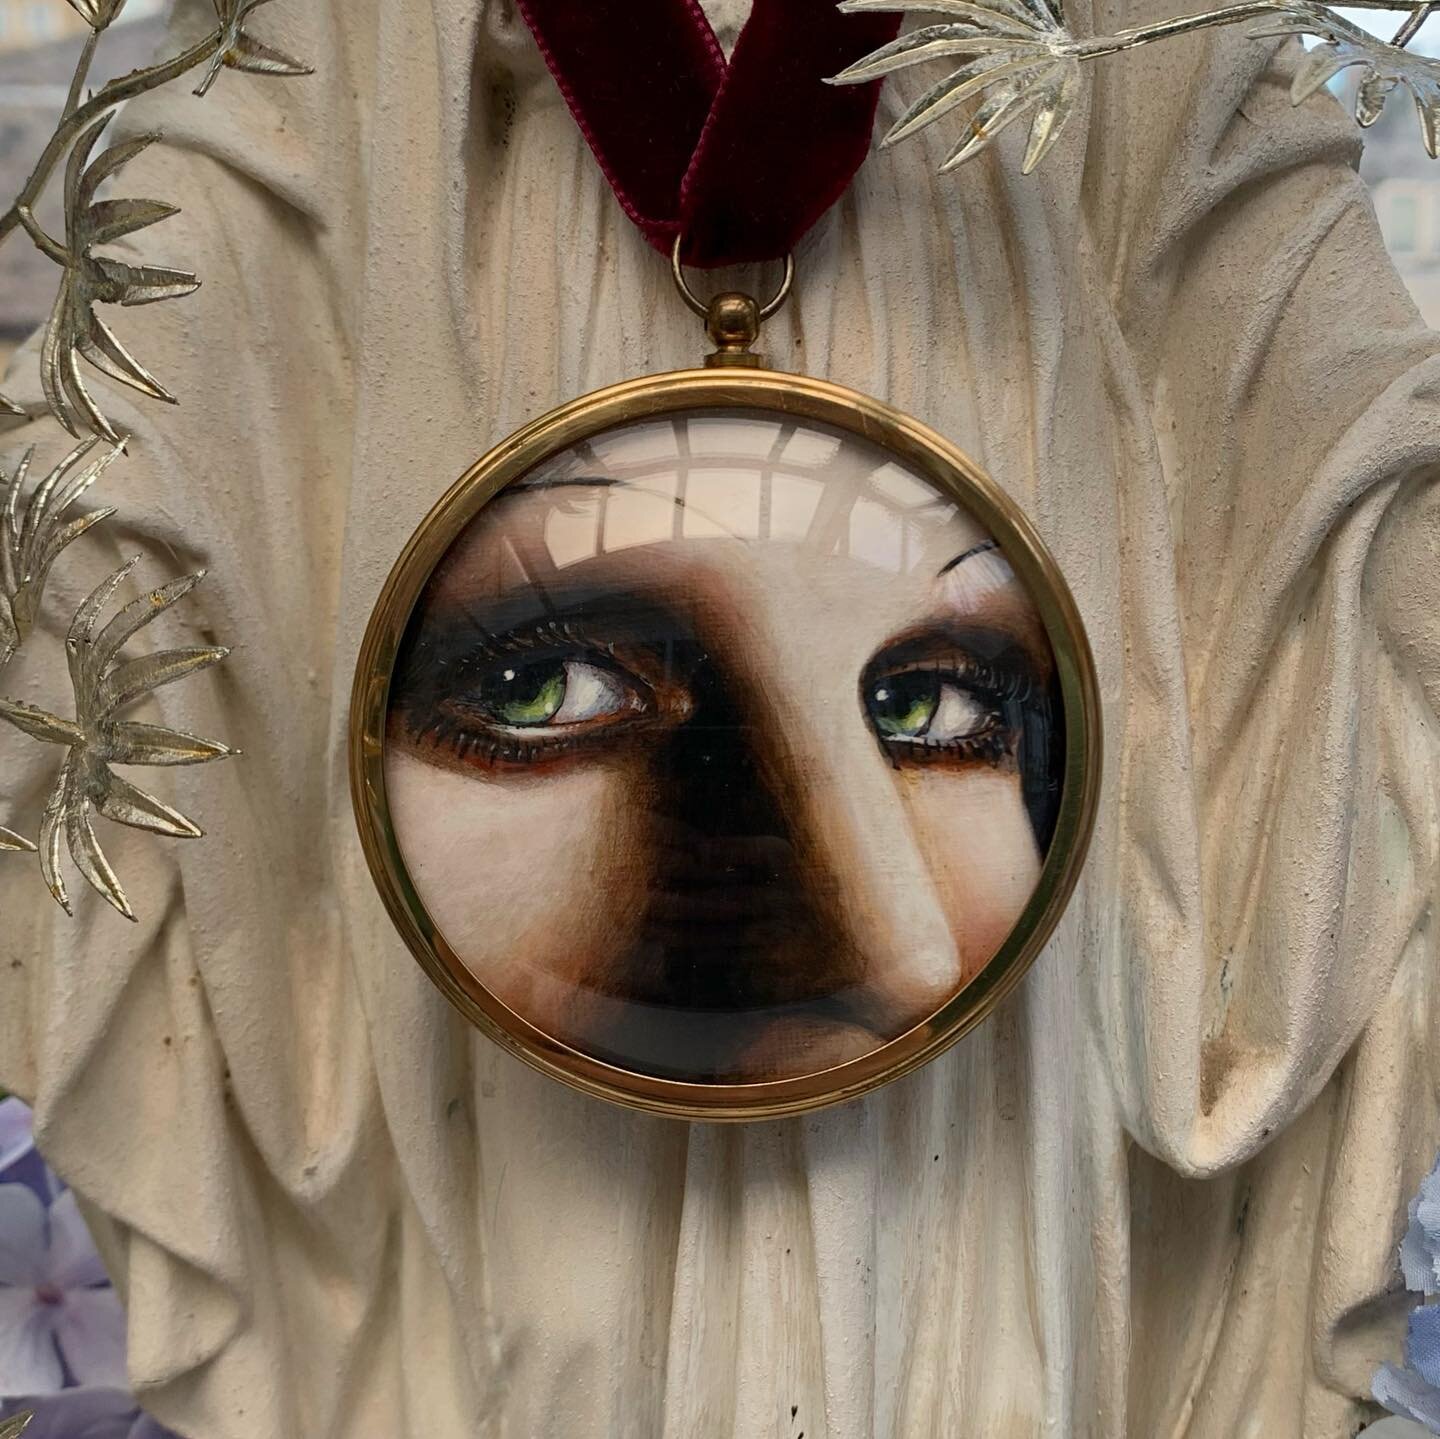 &ldquo;Cordelia&rdquo;

In this Antique Georgian domed glass frame lies a partial portrait inspired by a scene from &ldquo;Velvet Goldmine&rdquo; Where Jack Fairy contemplates his evening in a compact mirror. Painted in acrylic on canvas, the gold fr